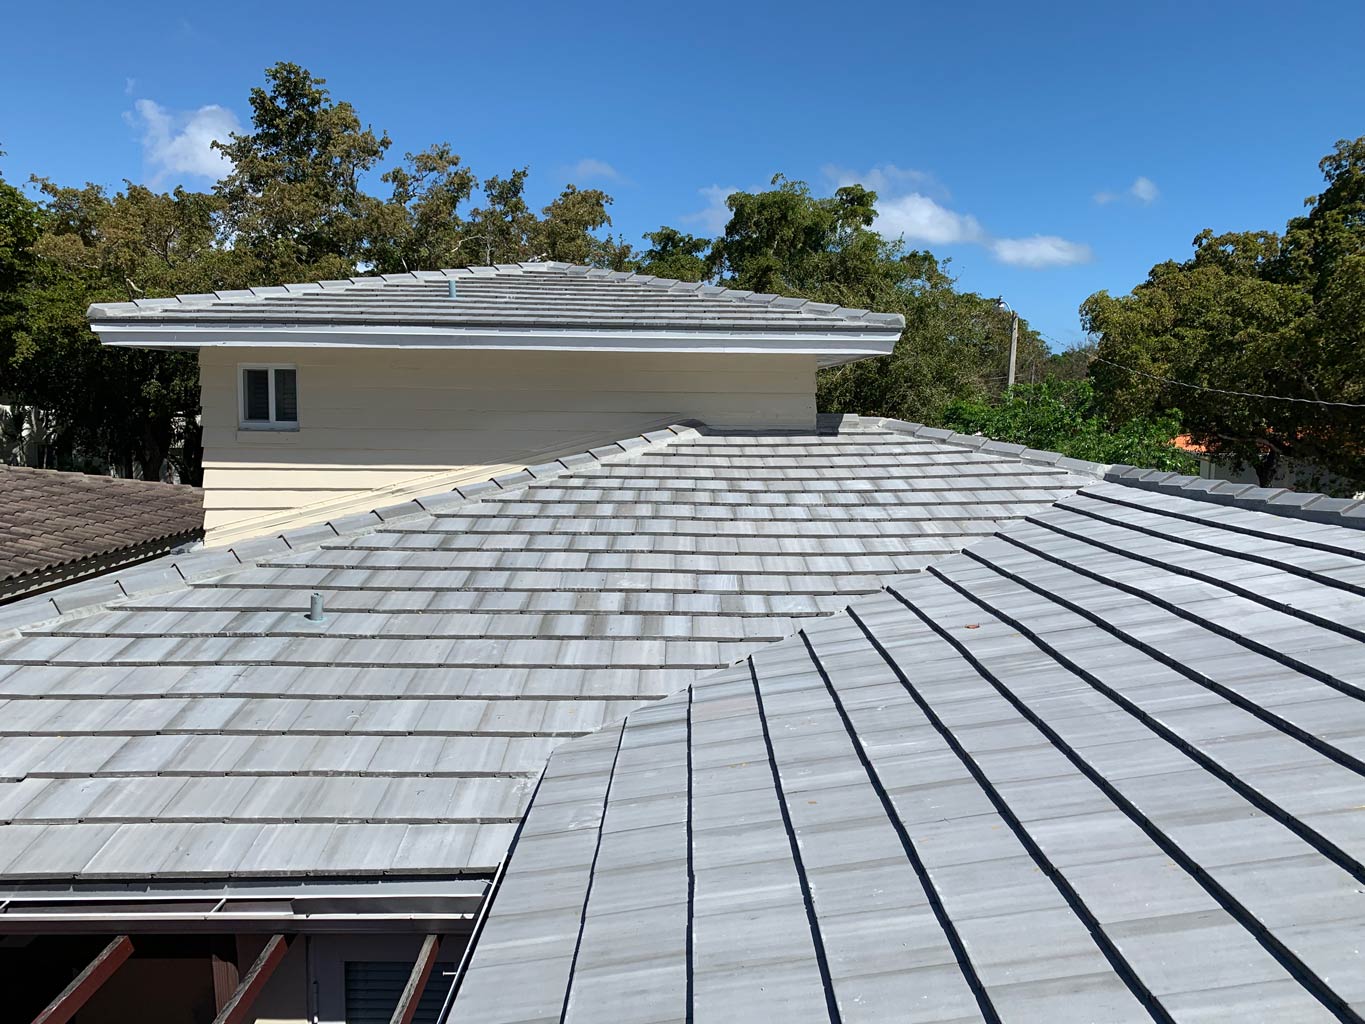 After photo of new gray concrete roof tiles installed at rear valley.